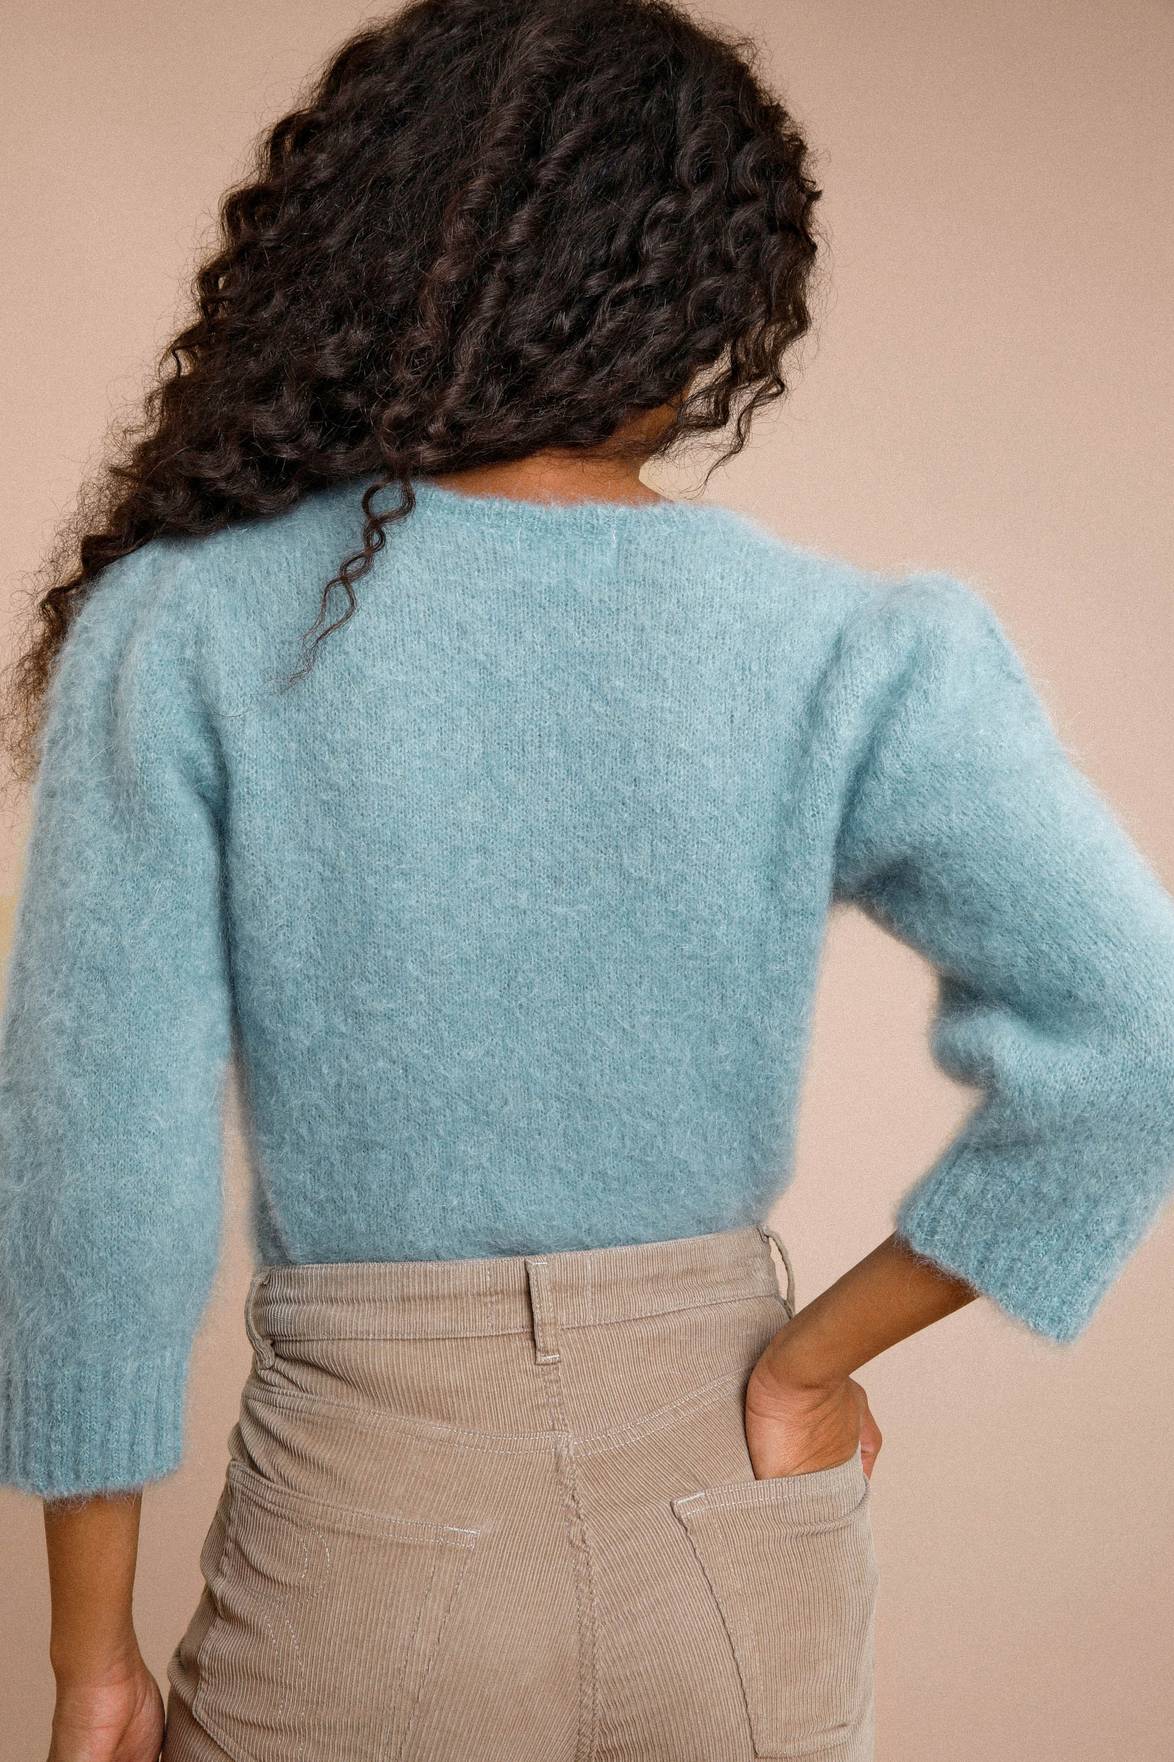 Indulge in the cozy comfort of our Pull Marcelina! Made from a wool blended fabric, this pullover is perfect for chilly days. The solid color and knitted design add a touch of style to your casual look. Get ready to stay warm and fashionable all season long!